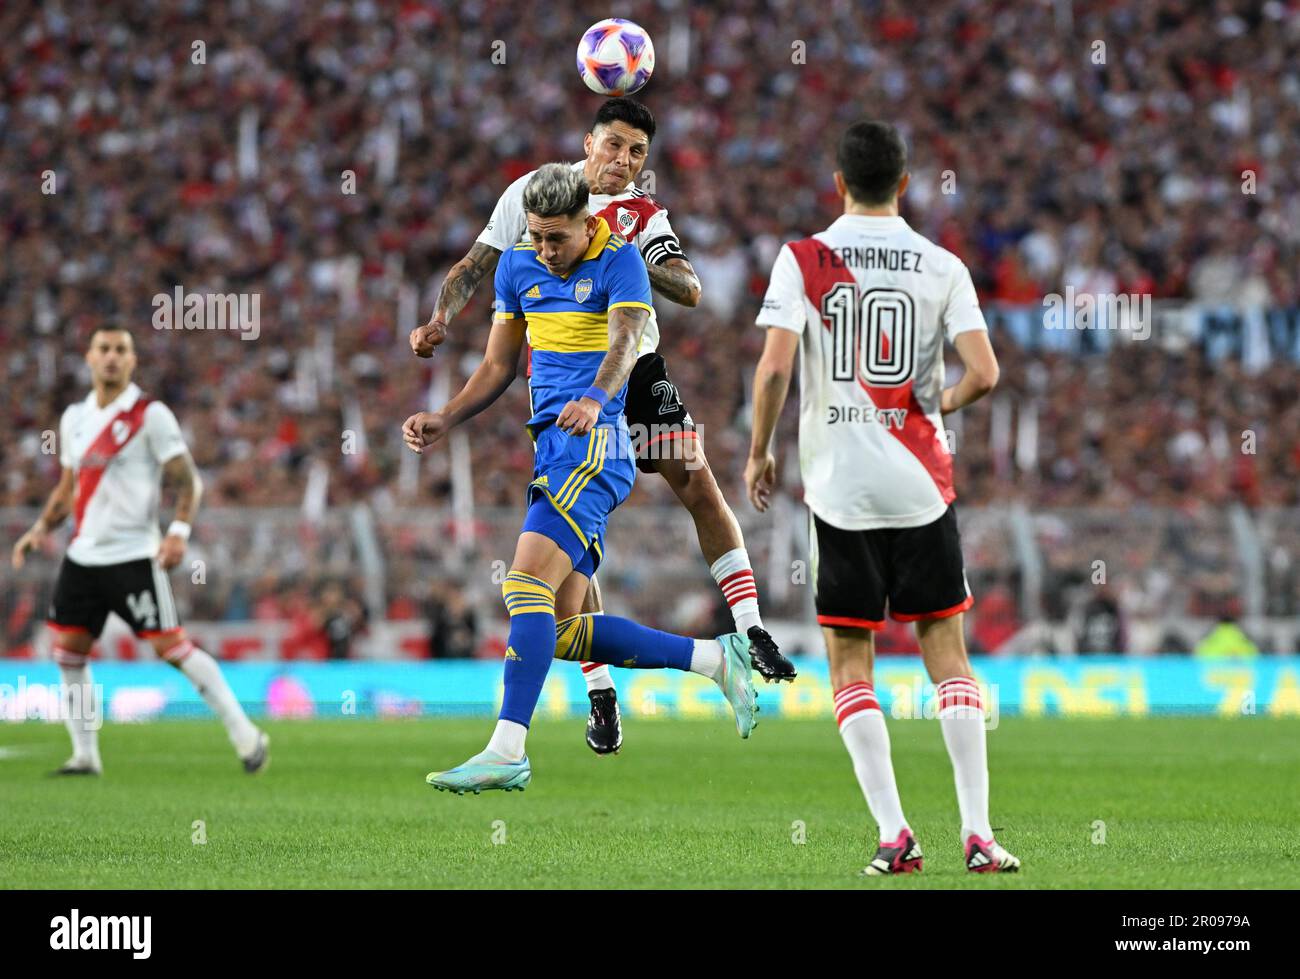 Buenos Aires, Argentina. 07th May, 2023. Monumental de Nunez Stadium Enzo Perez of River Plate competes with Luis Vazquez of Boca Juniors, during the match between River Plate and Boca Juniors, for the 15th round of the 2023 Argentine Championship, at the Monumental de Nunez Stadium this Sunday, 07. 30761 (Luciano Bisbal/SPP) Credit: SPP Sport Press Photo. /Alamy Live News Stock Photo